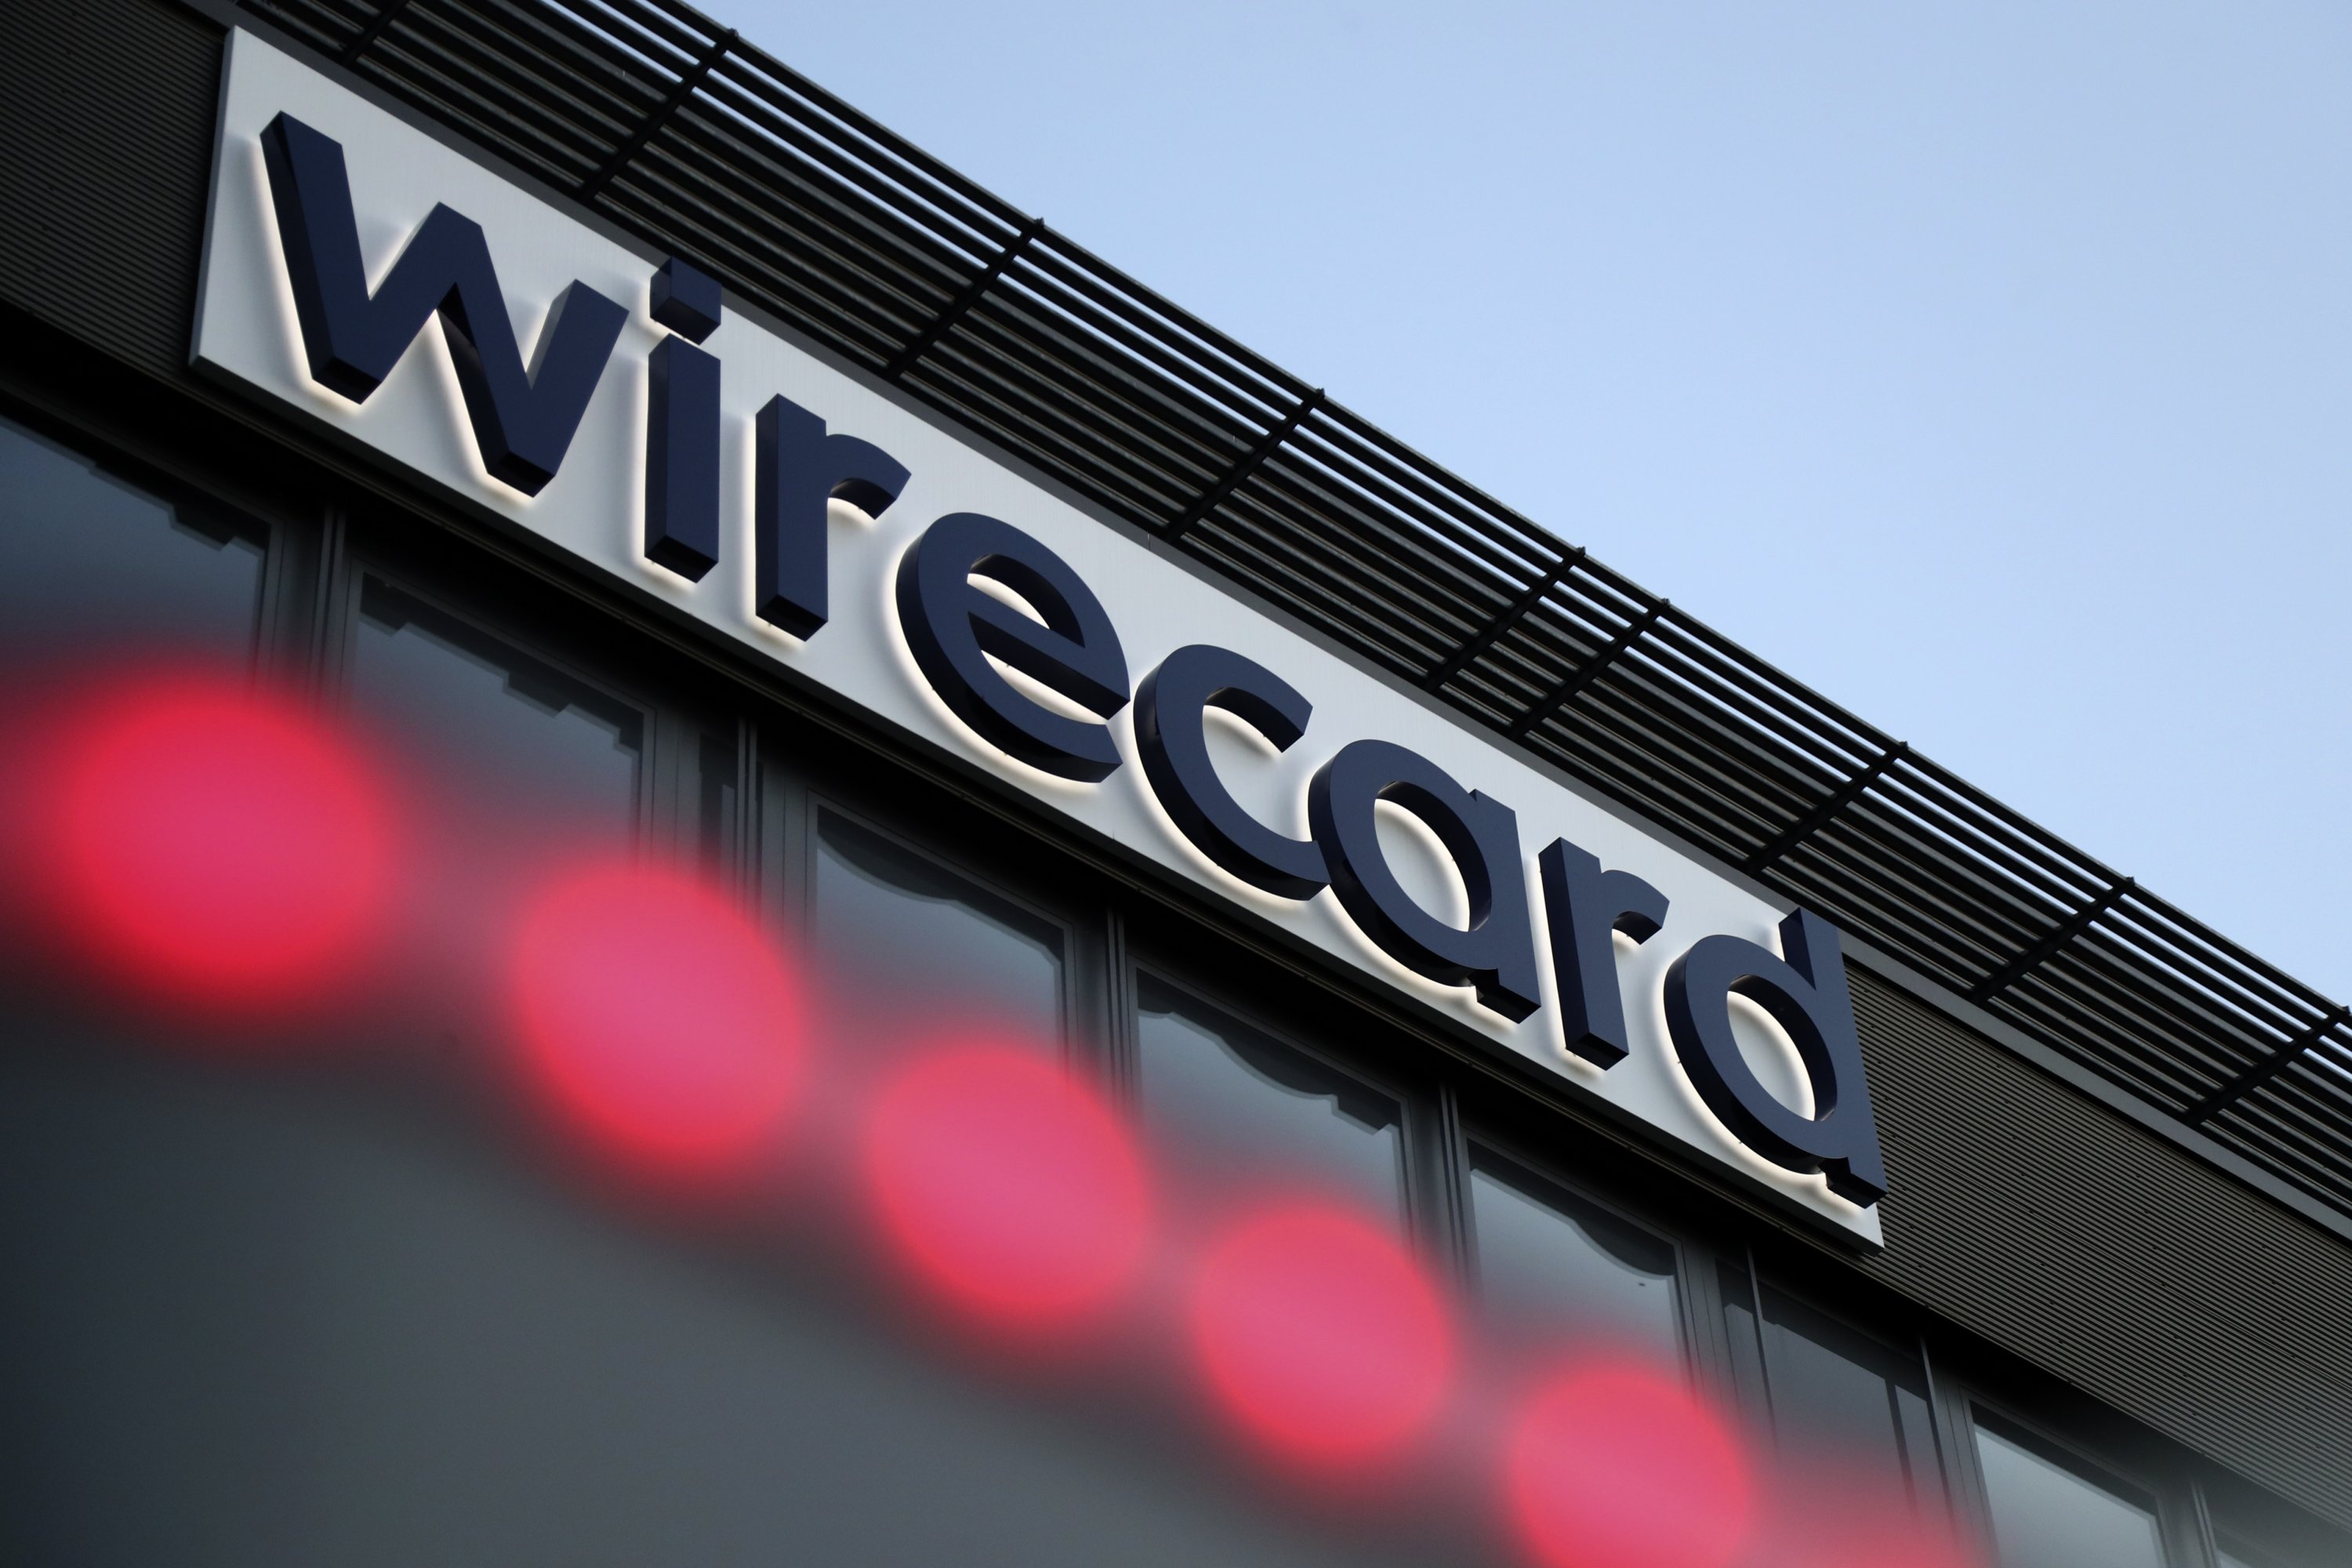 Merkel’s office had repeated contact with scandal-hit Wirecard thumbnail